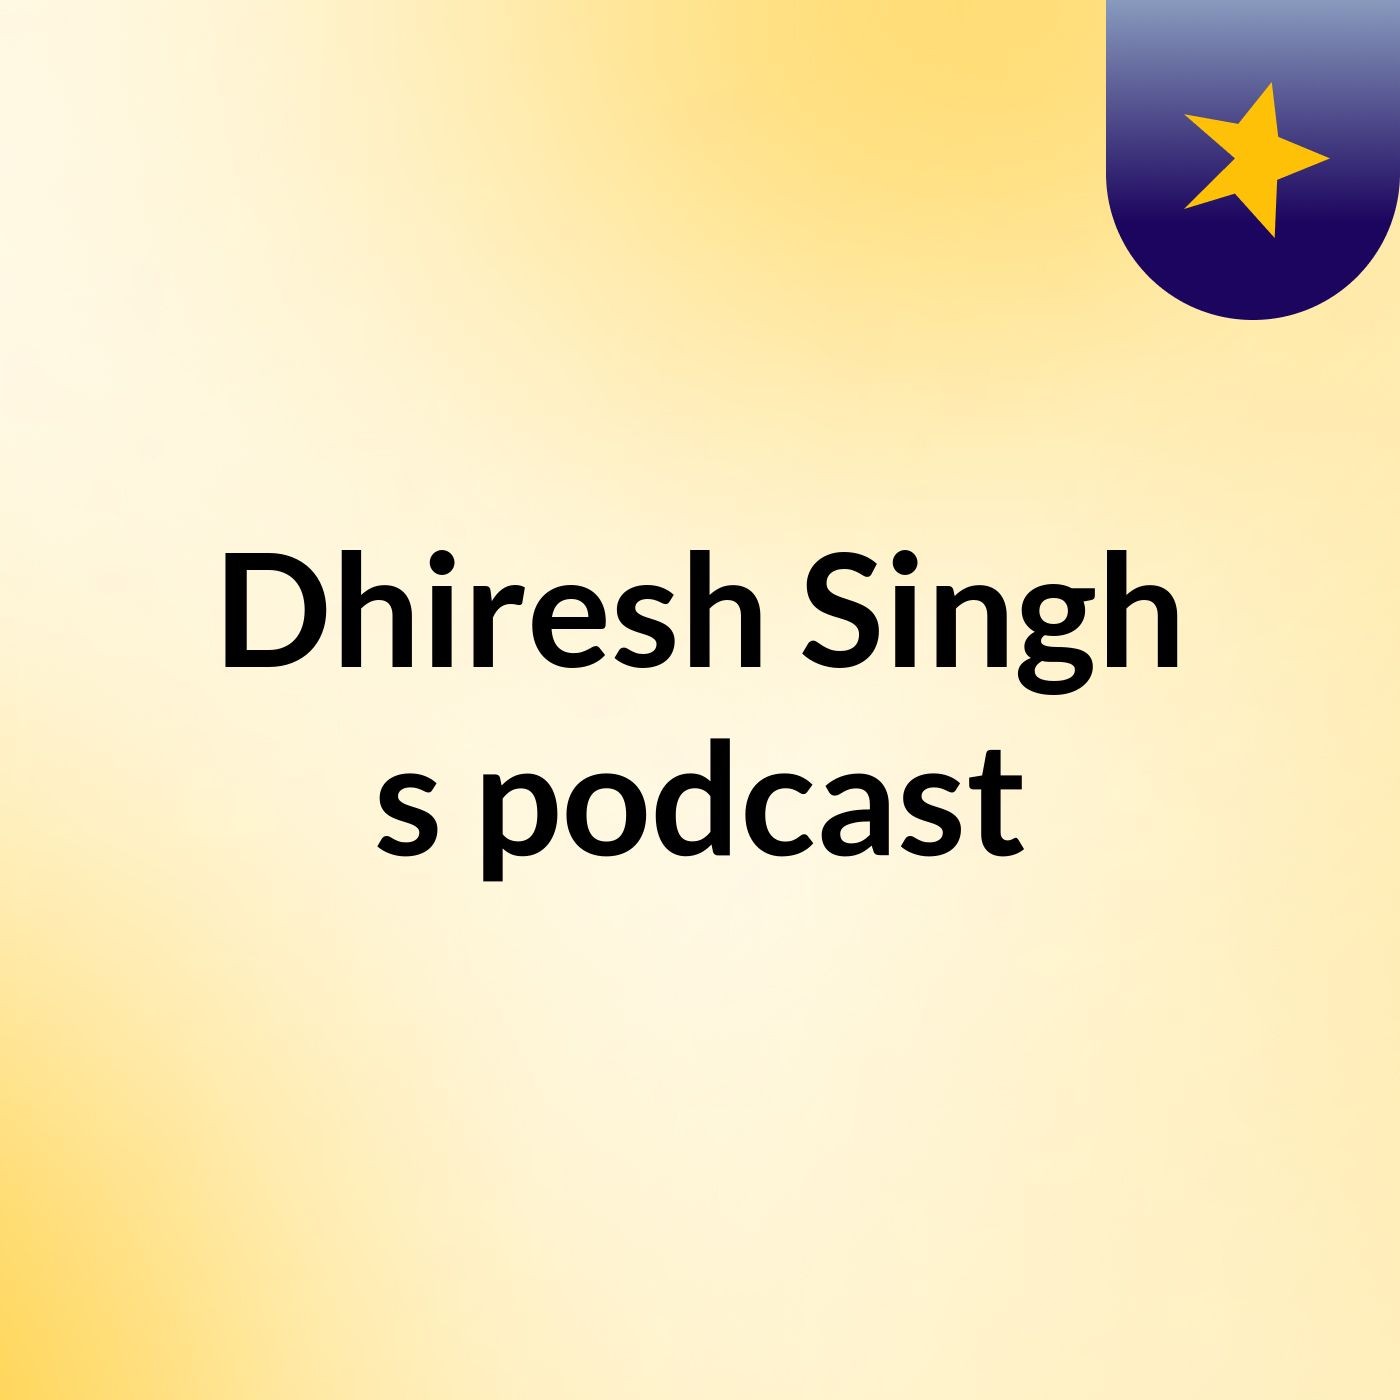 Episode 9 - Dhiresh Singh's podcast